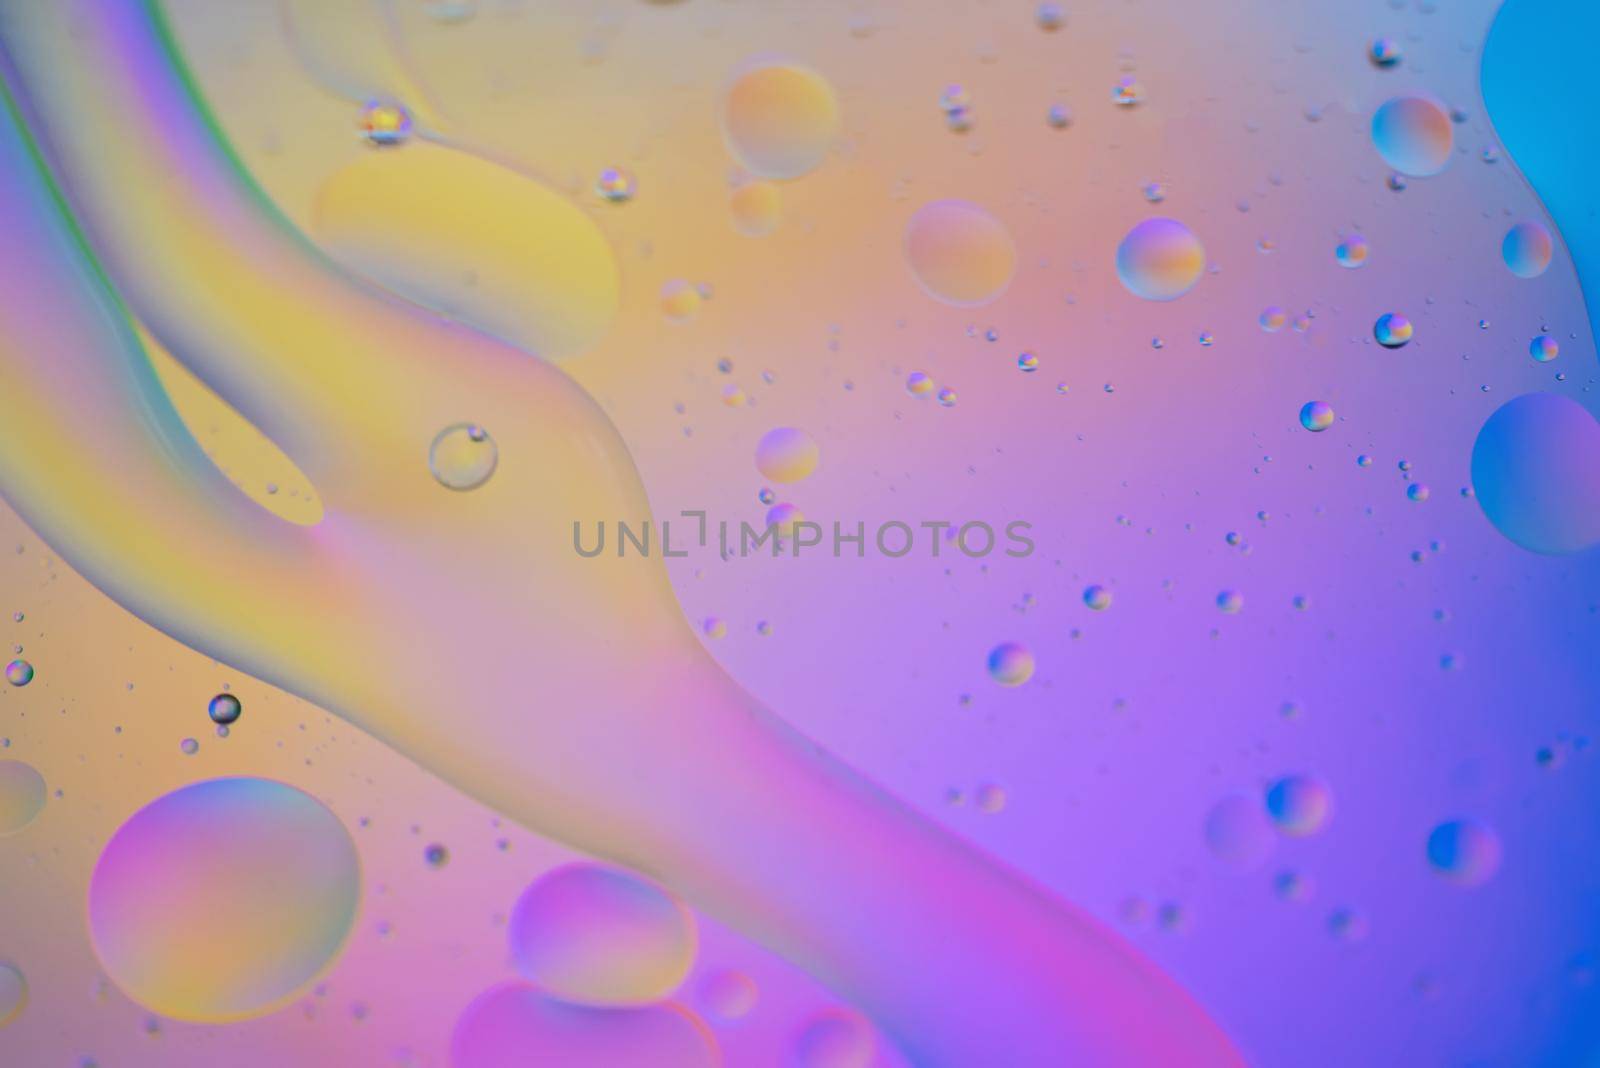 Oil drops in water. Abstract defocused psychedelic pattern image rainbow colored. Abstract background with colorful gradient colors. DOF.